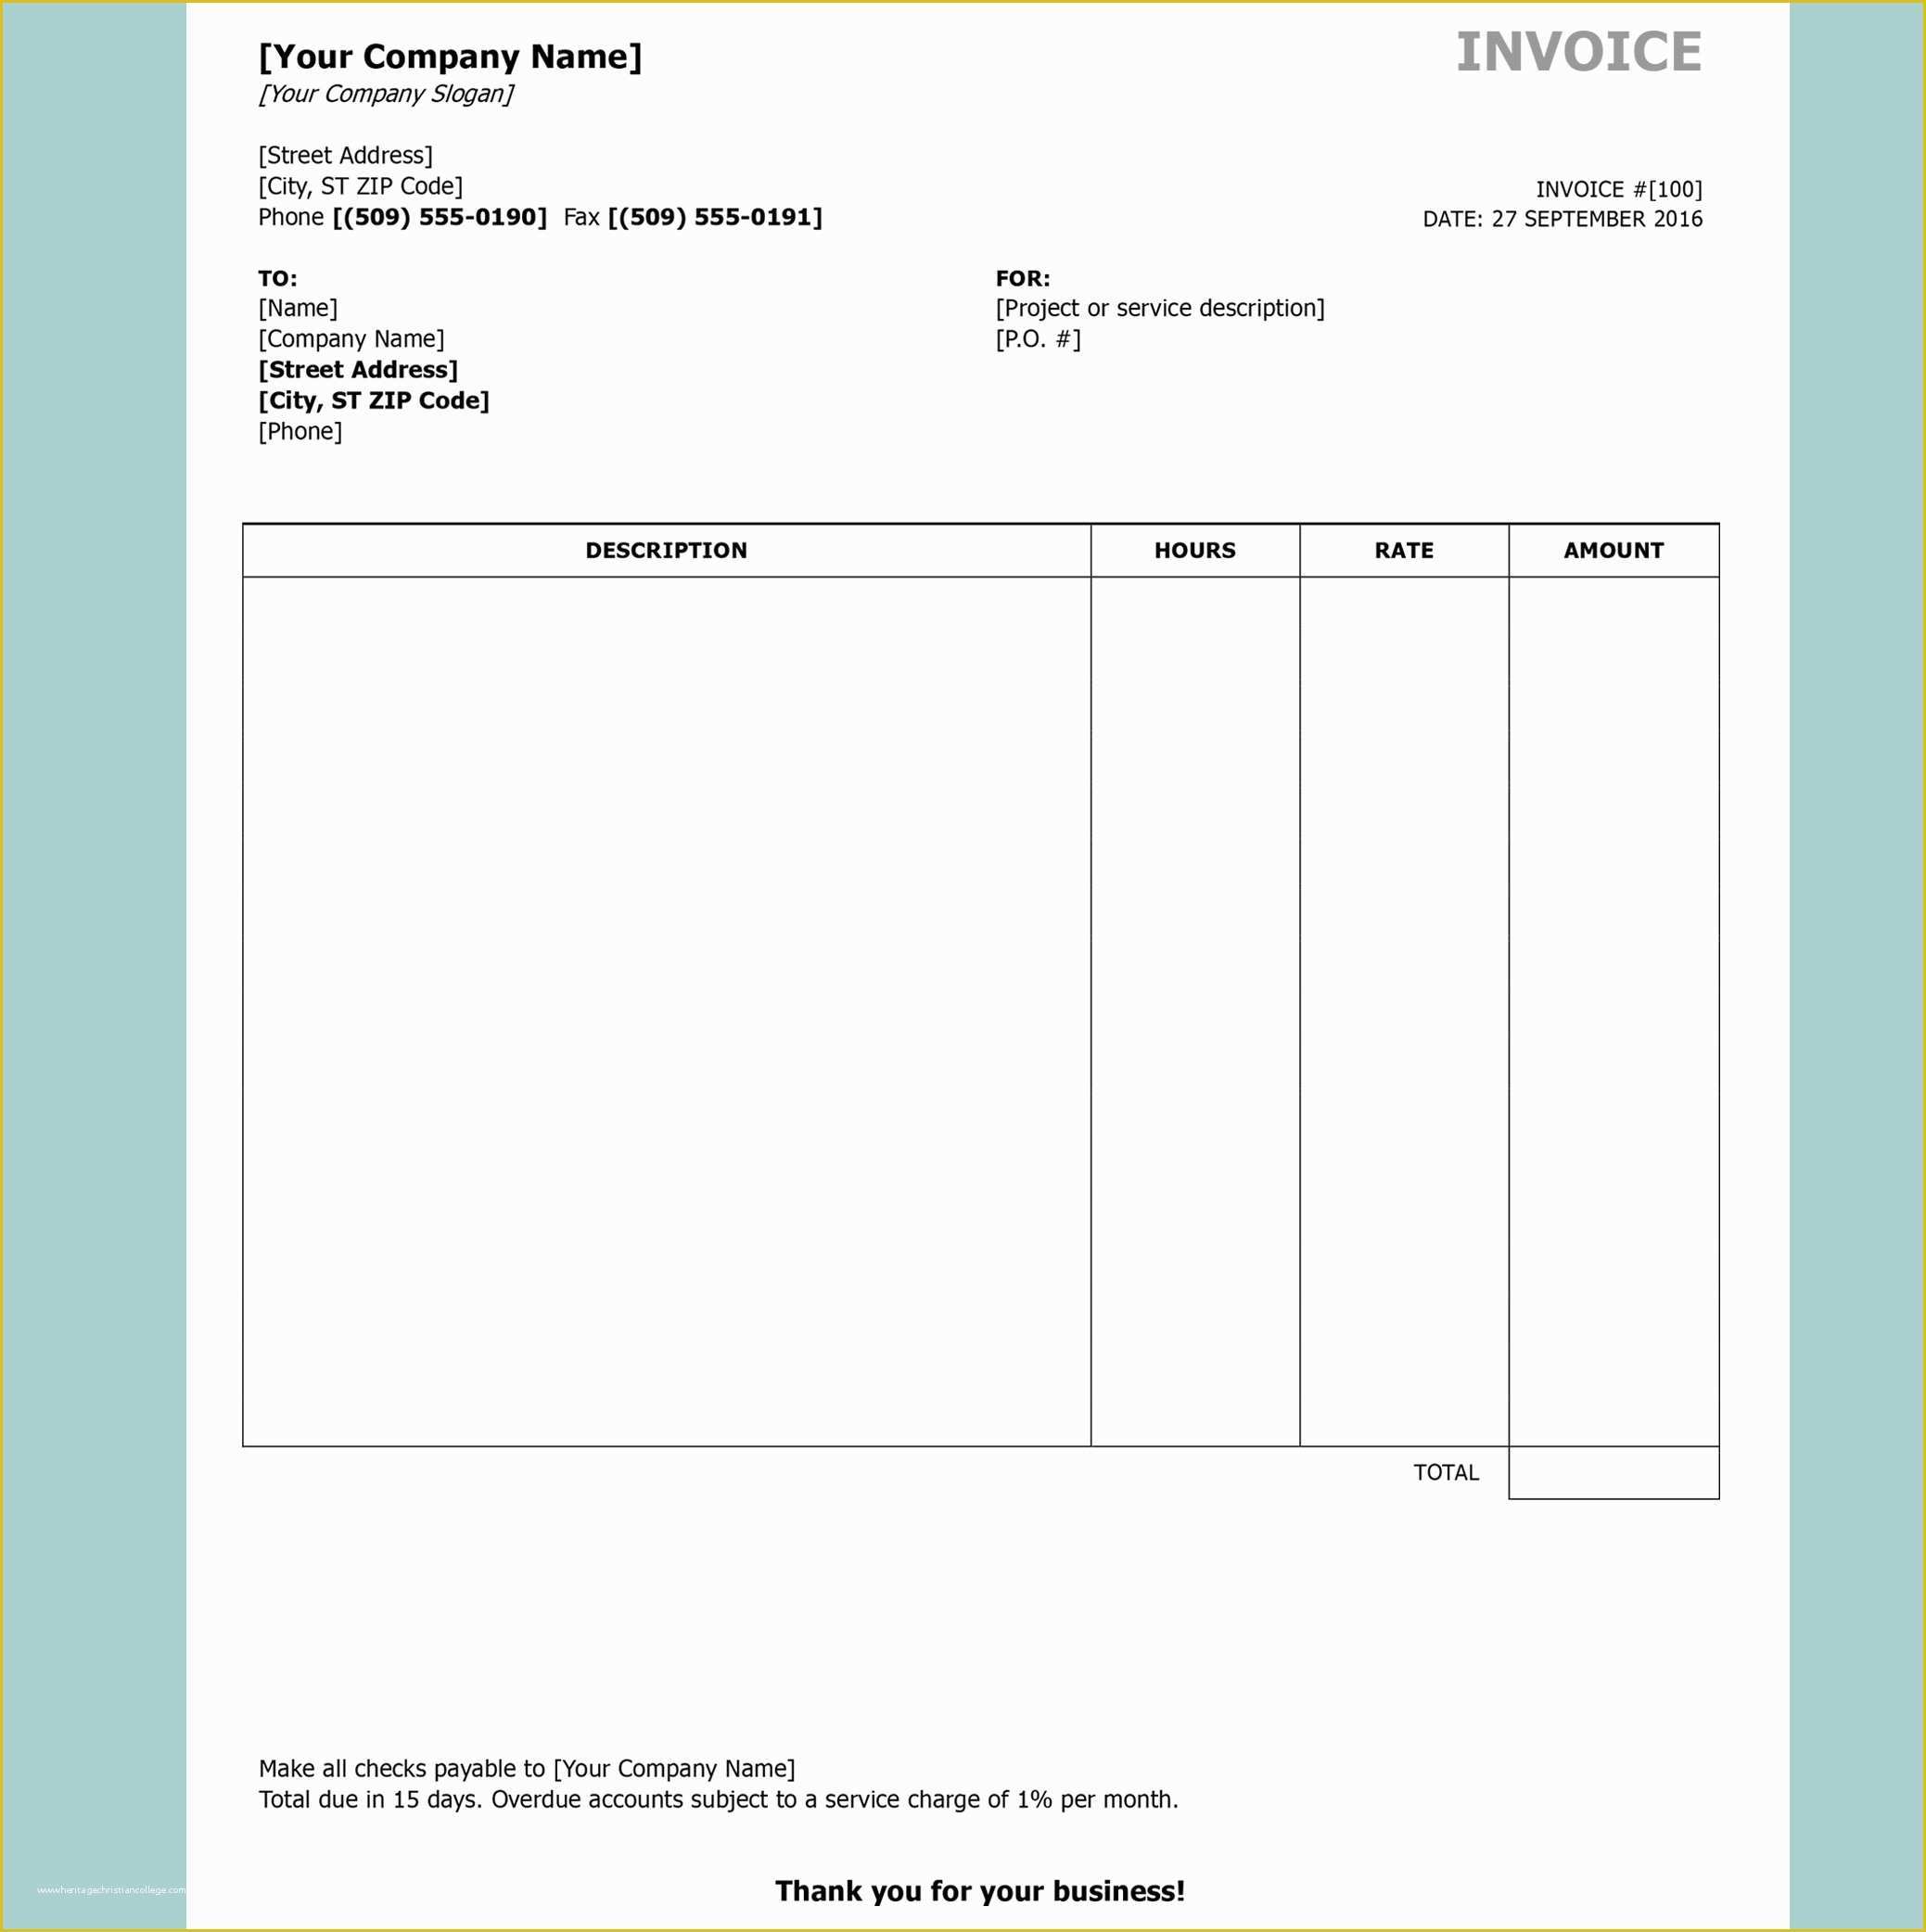 Microsoft Office Receipt Template Free Of Free Invoice Templates by Invoiceberry the Grid System